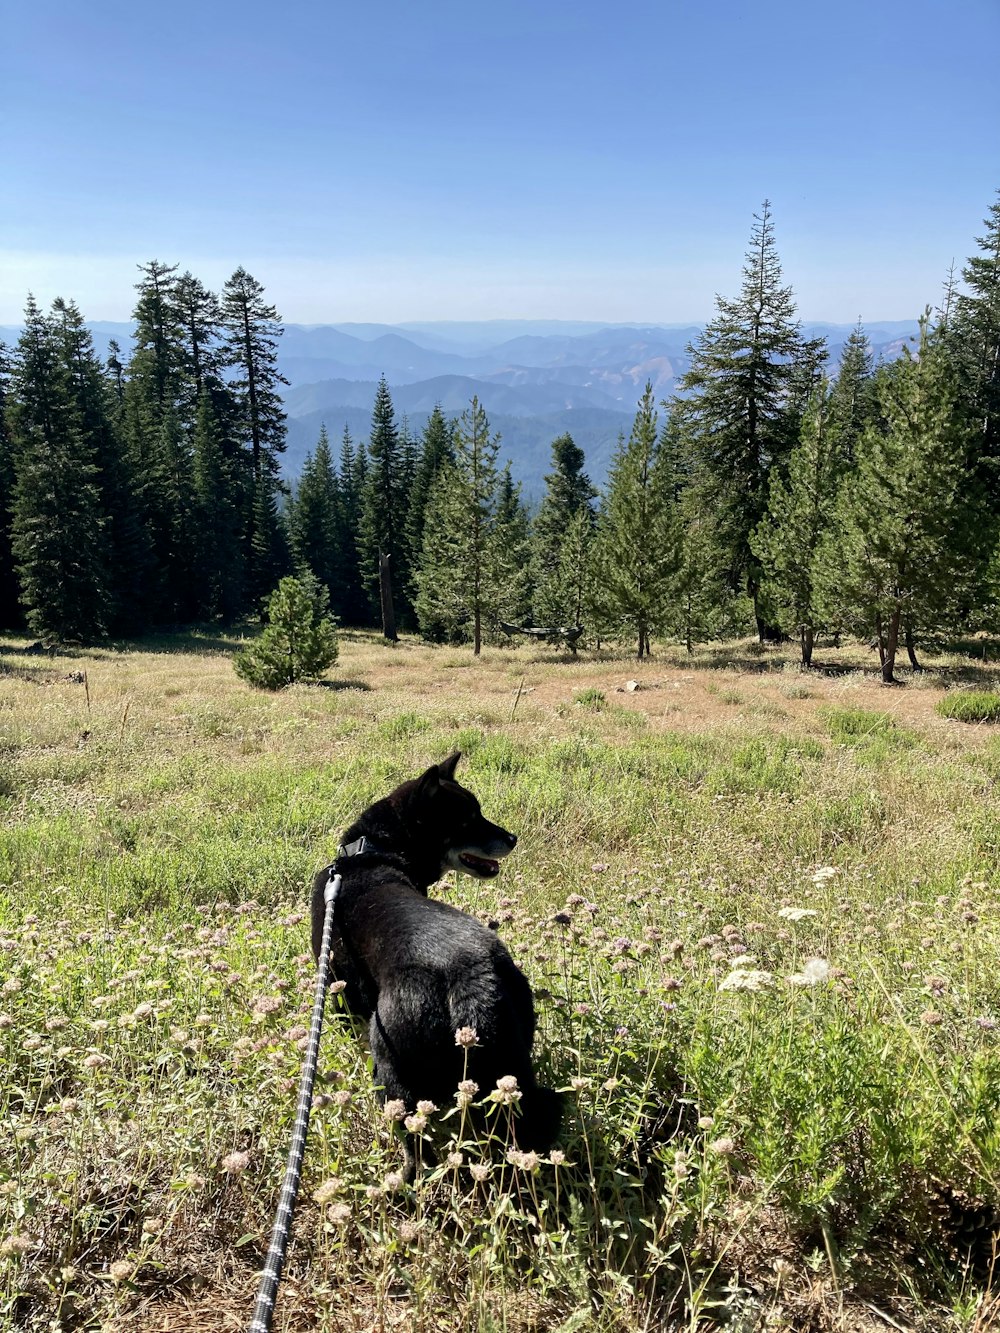 a dog on a leash in a grassy field with trees and mountains in the background